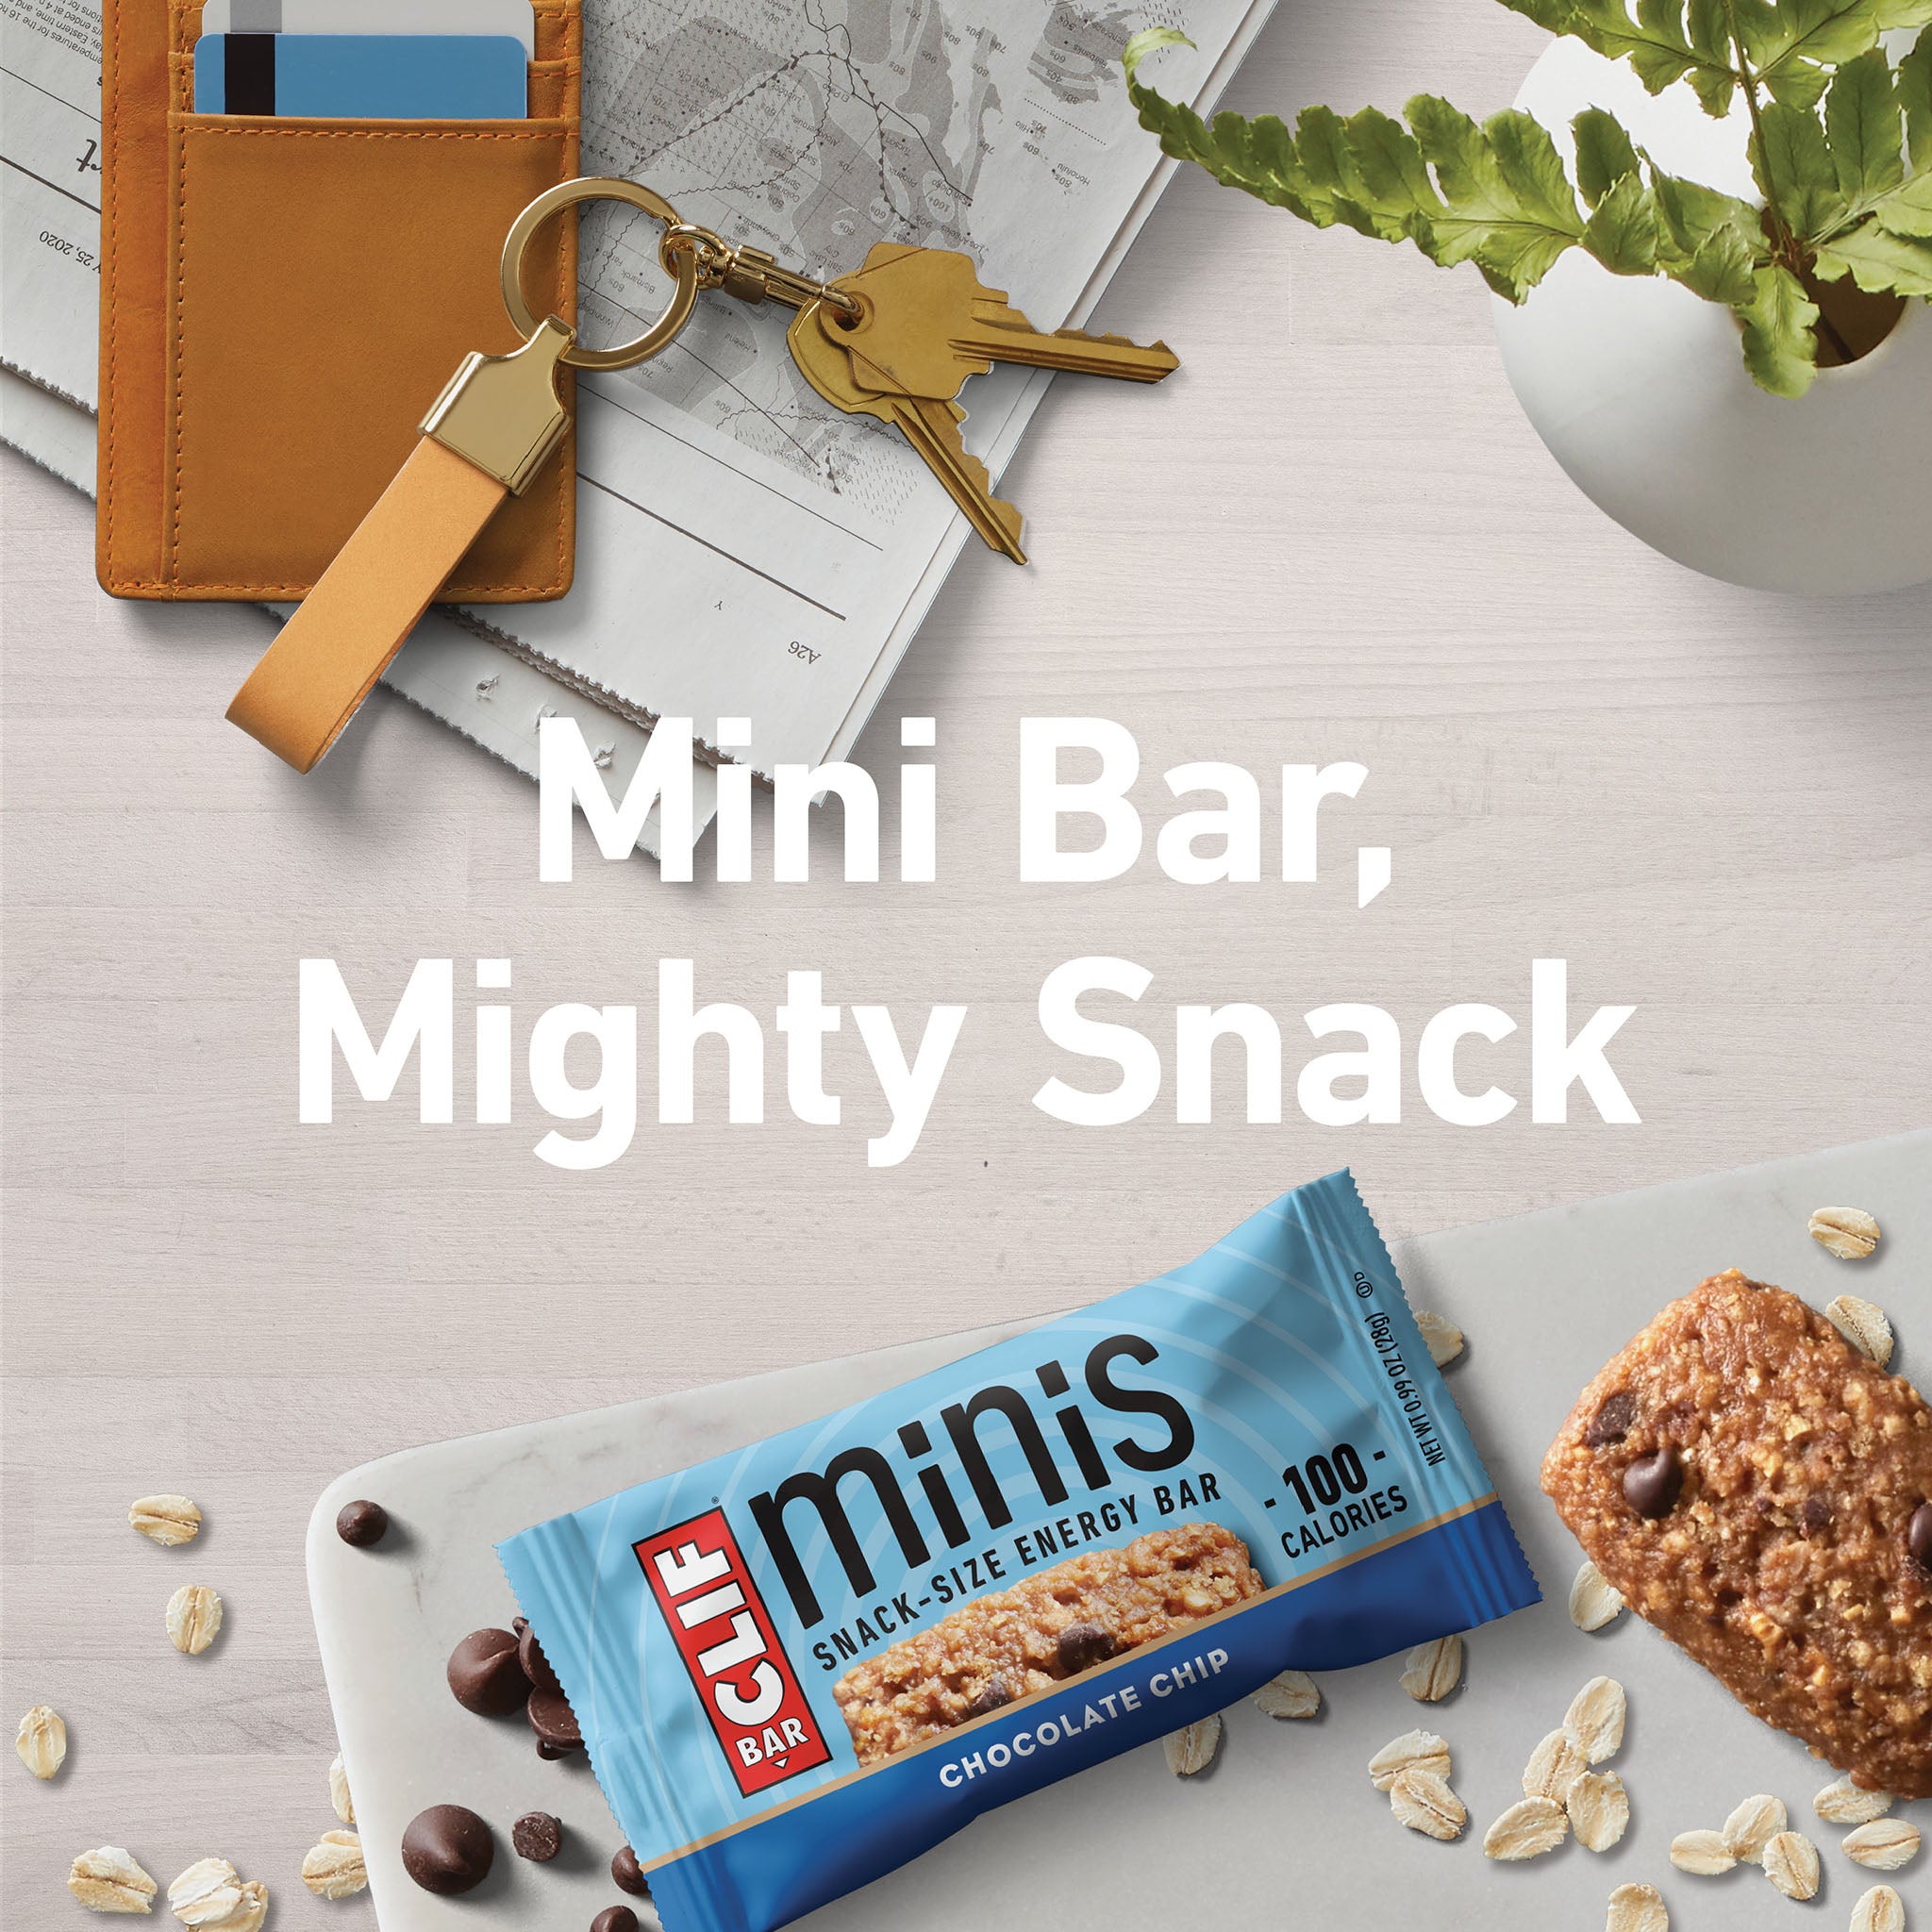 Minibar Products. For The Ultimate Guest Experience; A Unique